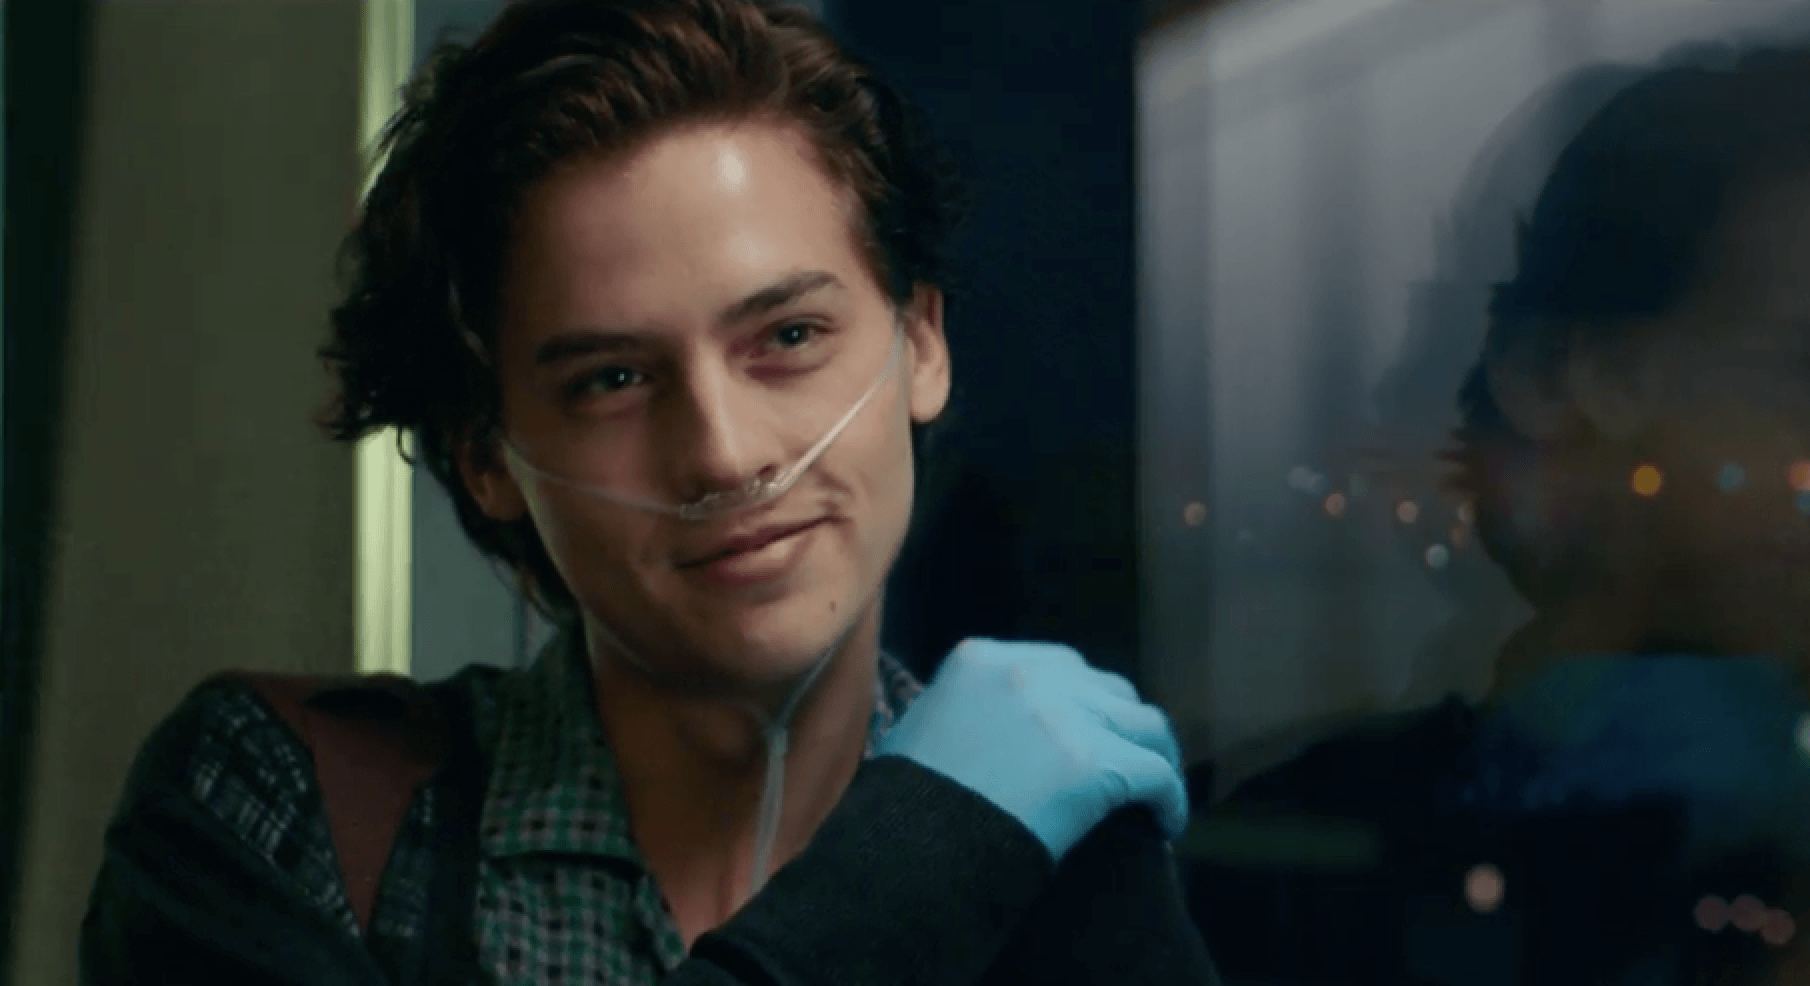 Five Feet Apart' Trailer: Watch Cole Sprouse's New Movie